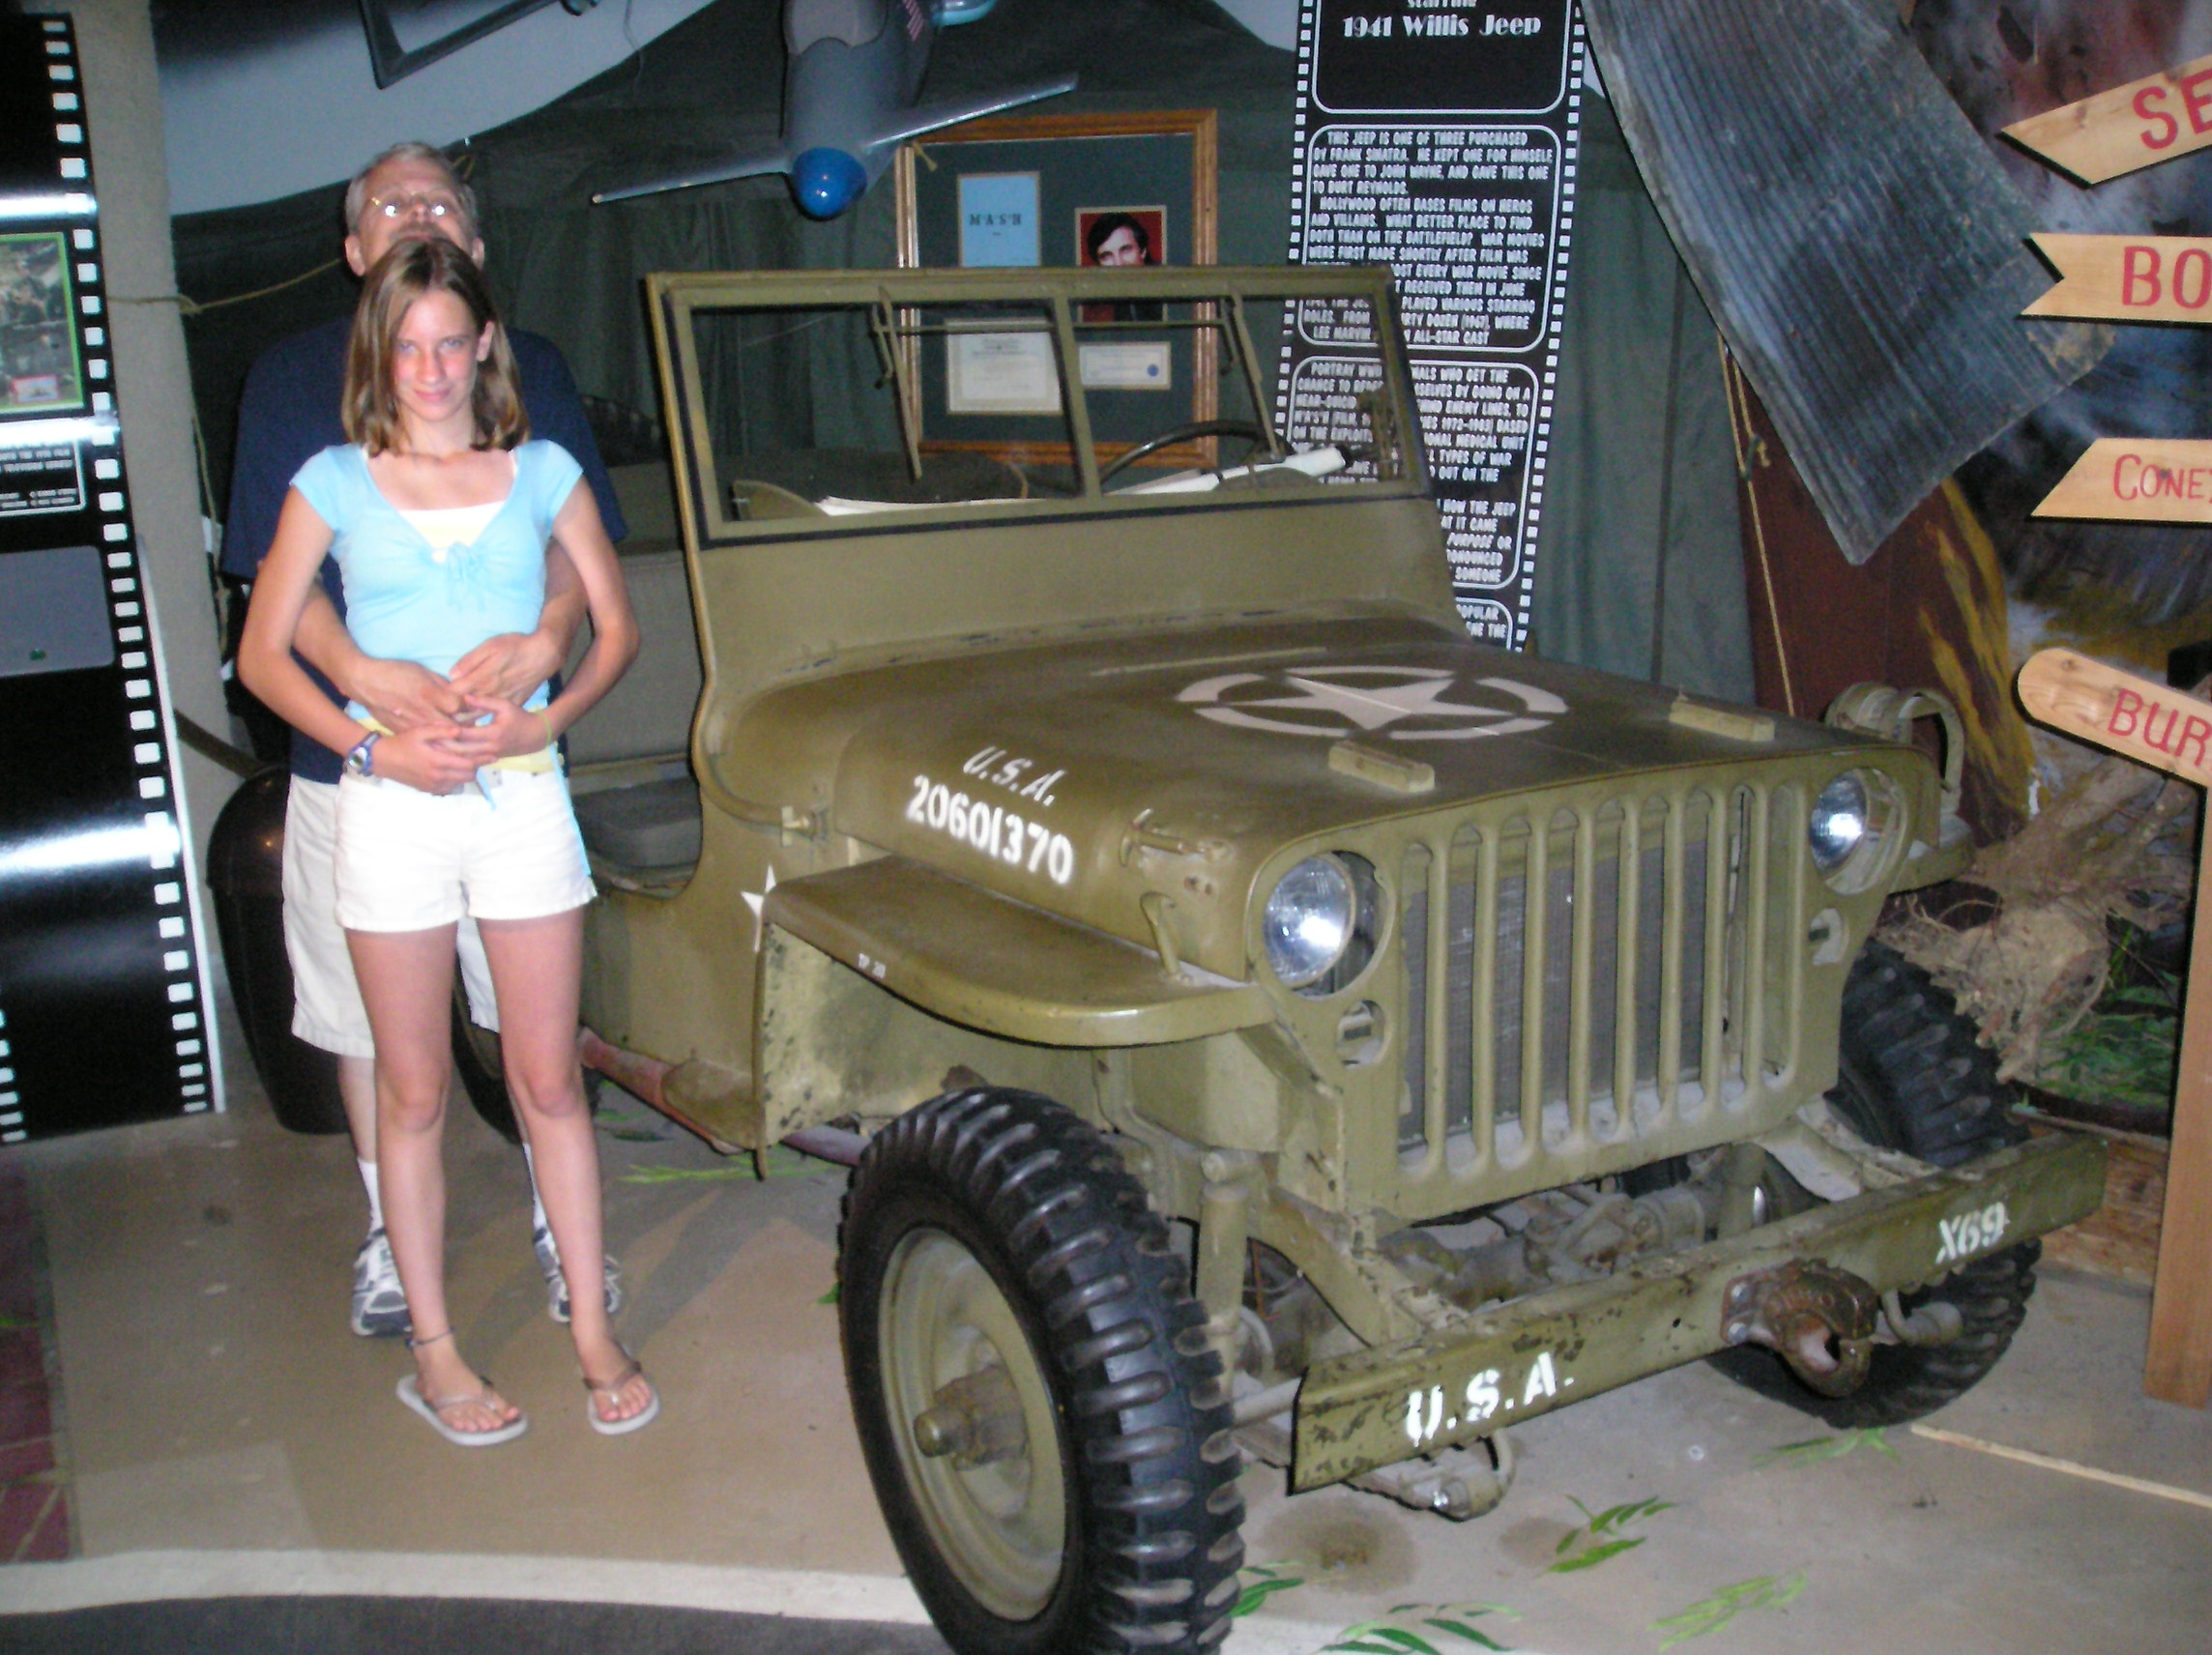 1941 Willis jeep for sale #3